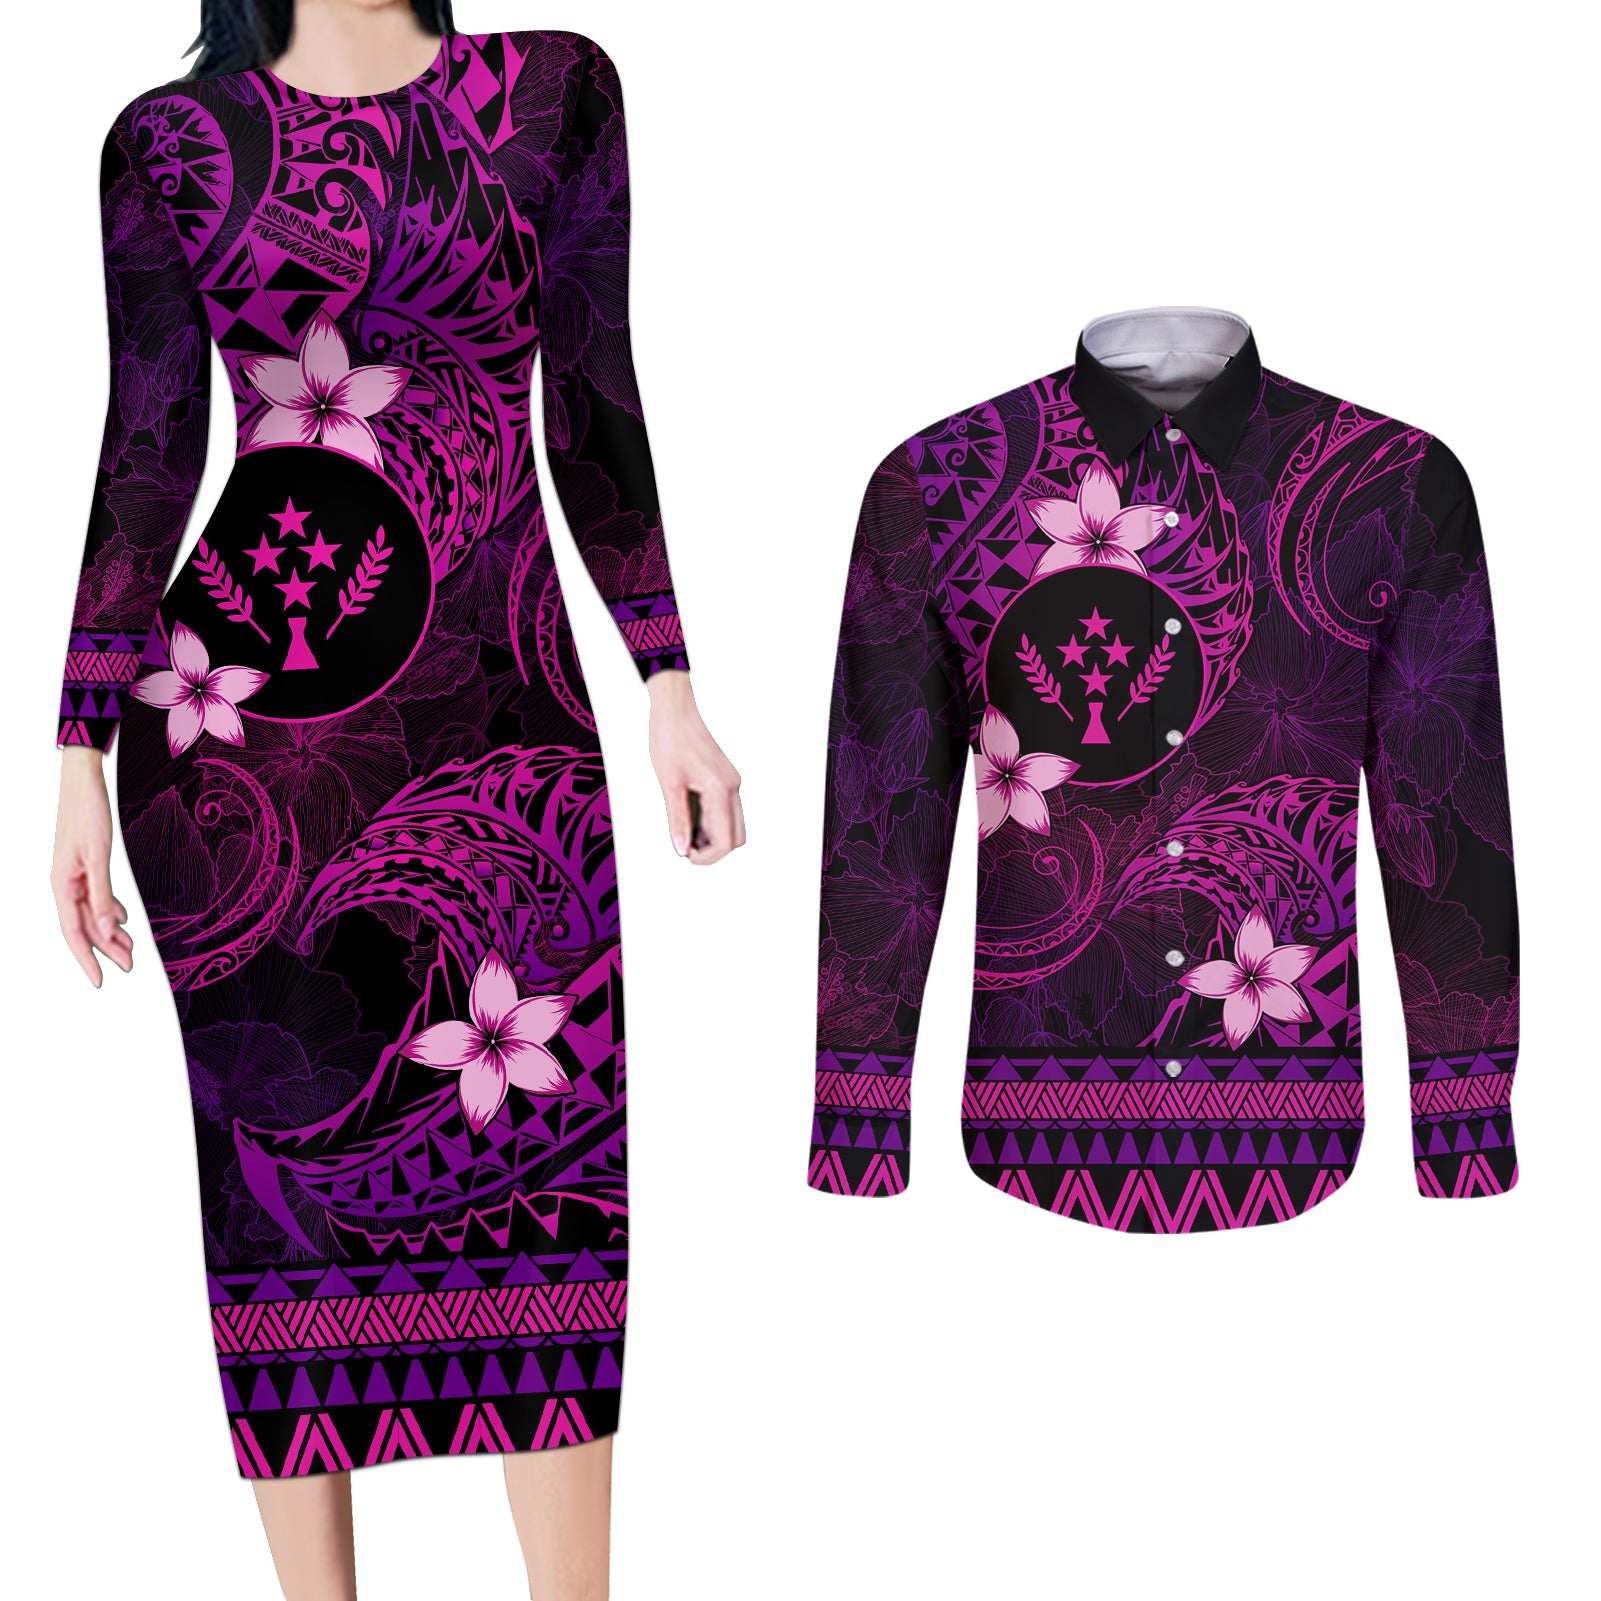 FSM Kosrae State Couples Matching Long Sleeve Bodycon Dress and Long Sleeve Button Shirt Tribal Pattern Pink Version LT01 Pink - Polynesian Pride